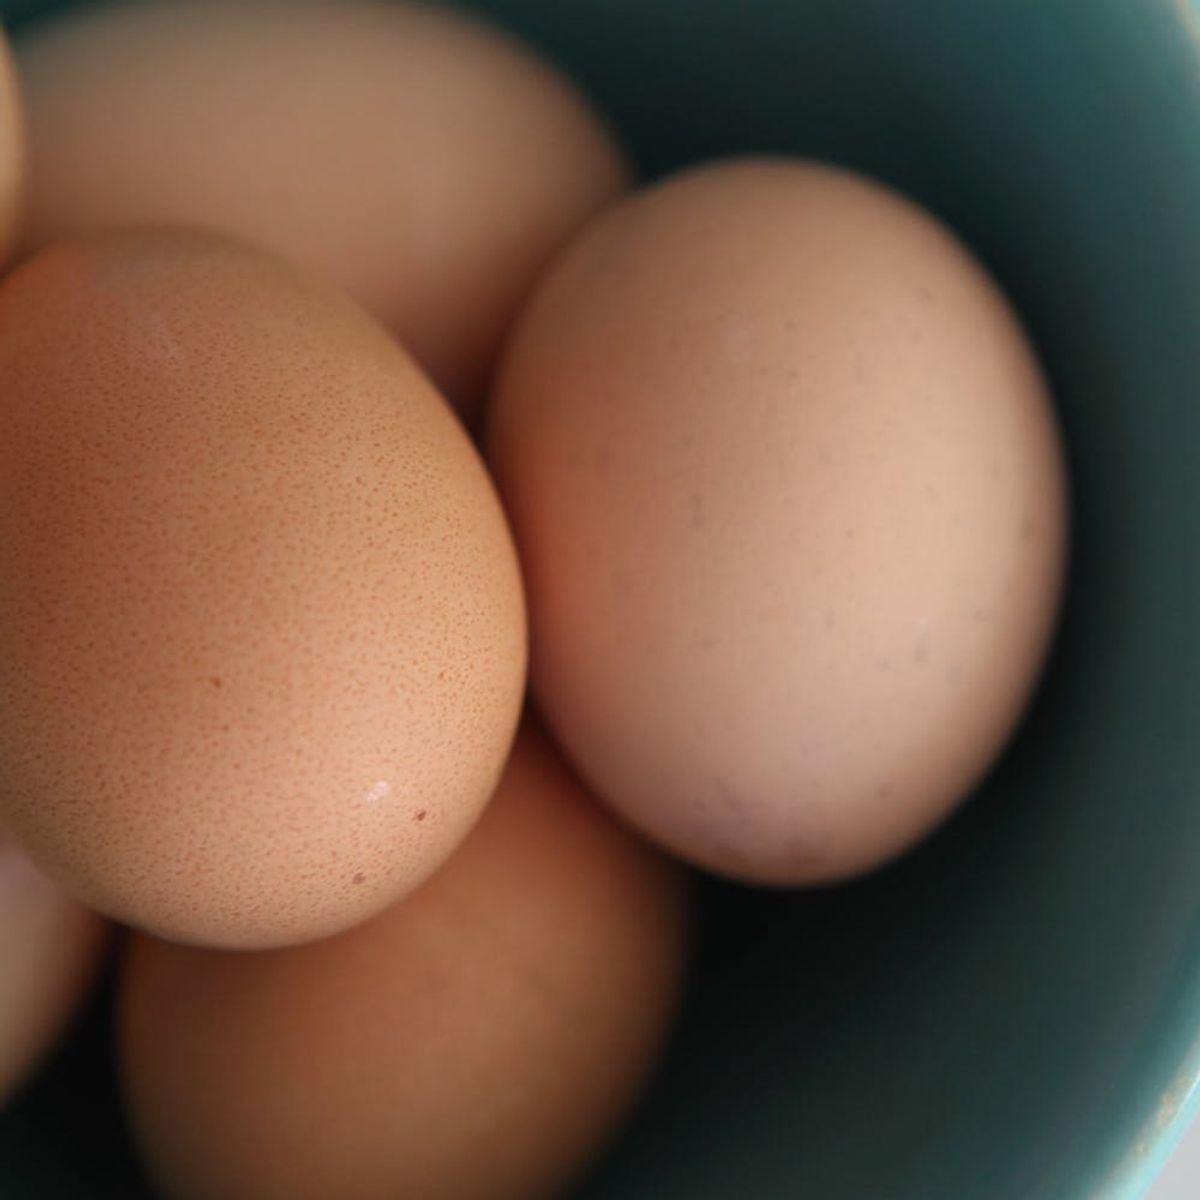 A Massive Egg Recall Has Been Issued for Salmonella in 9 States